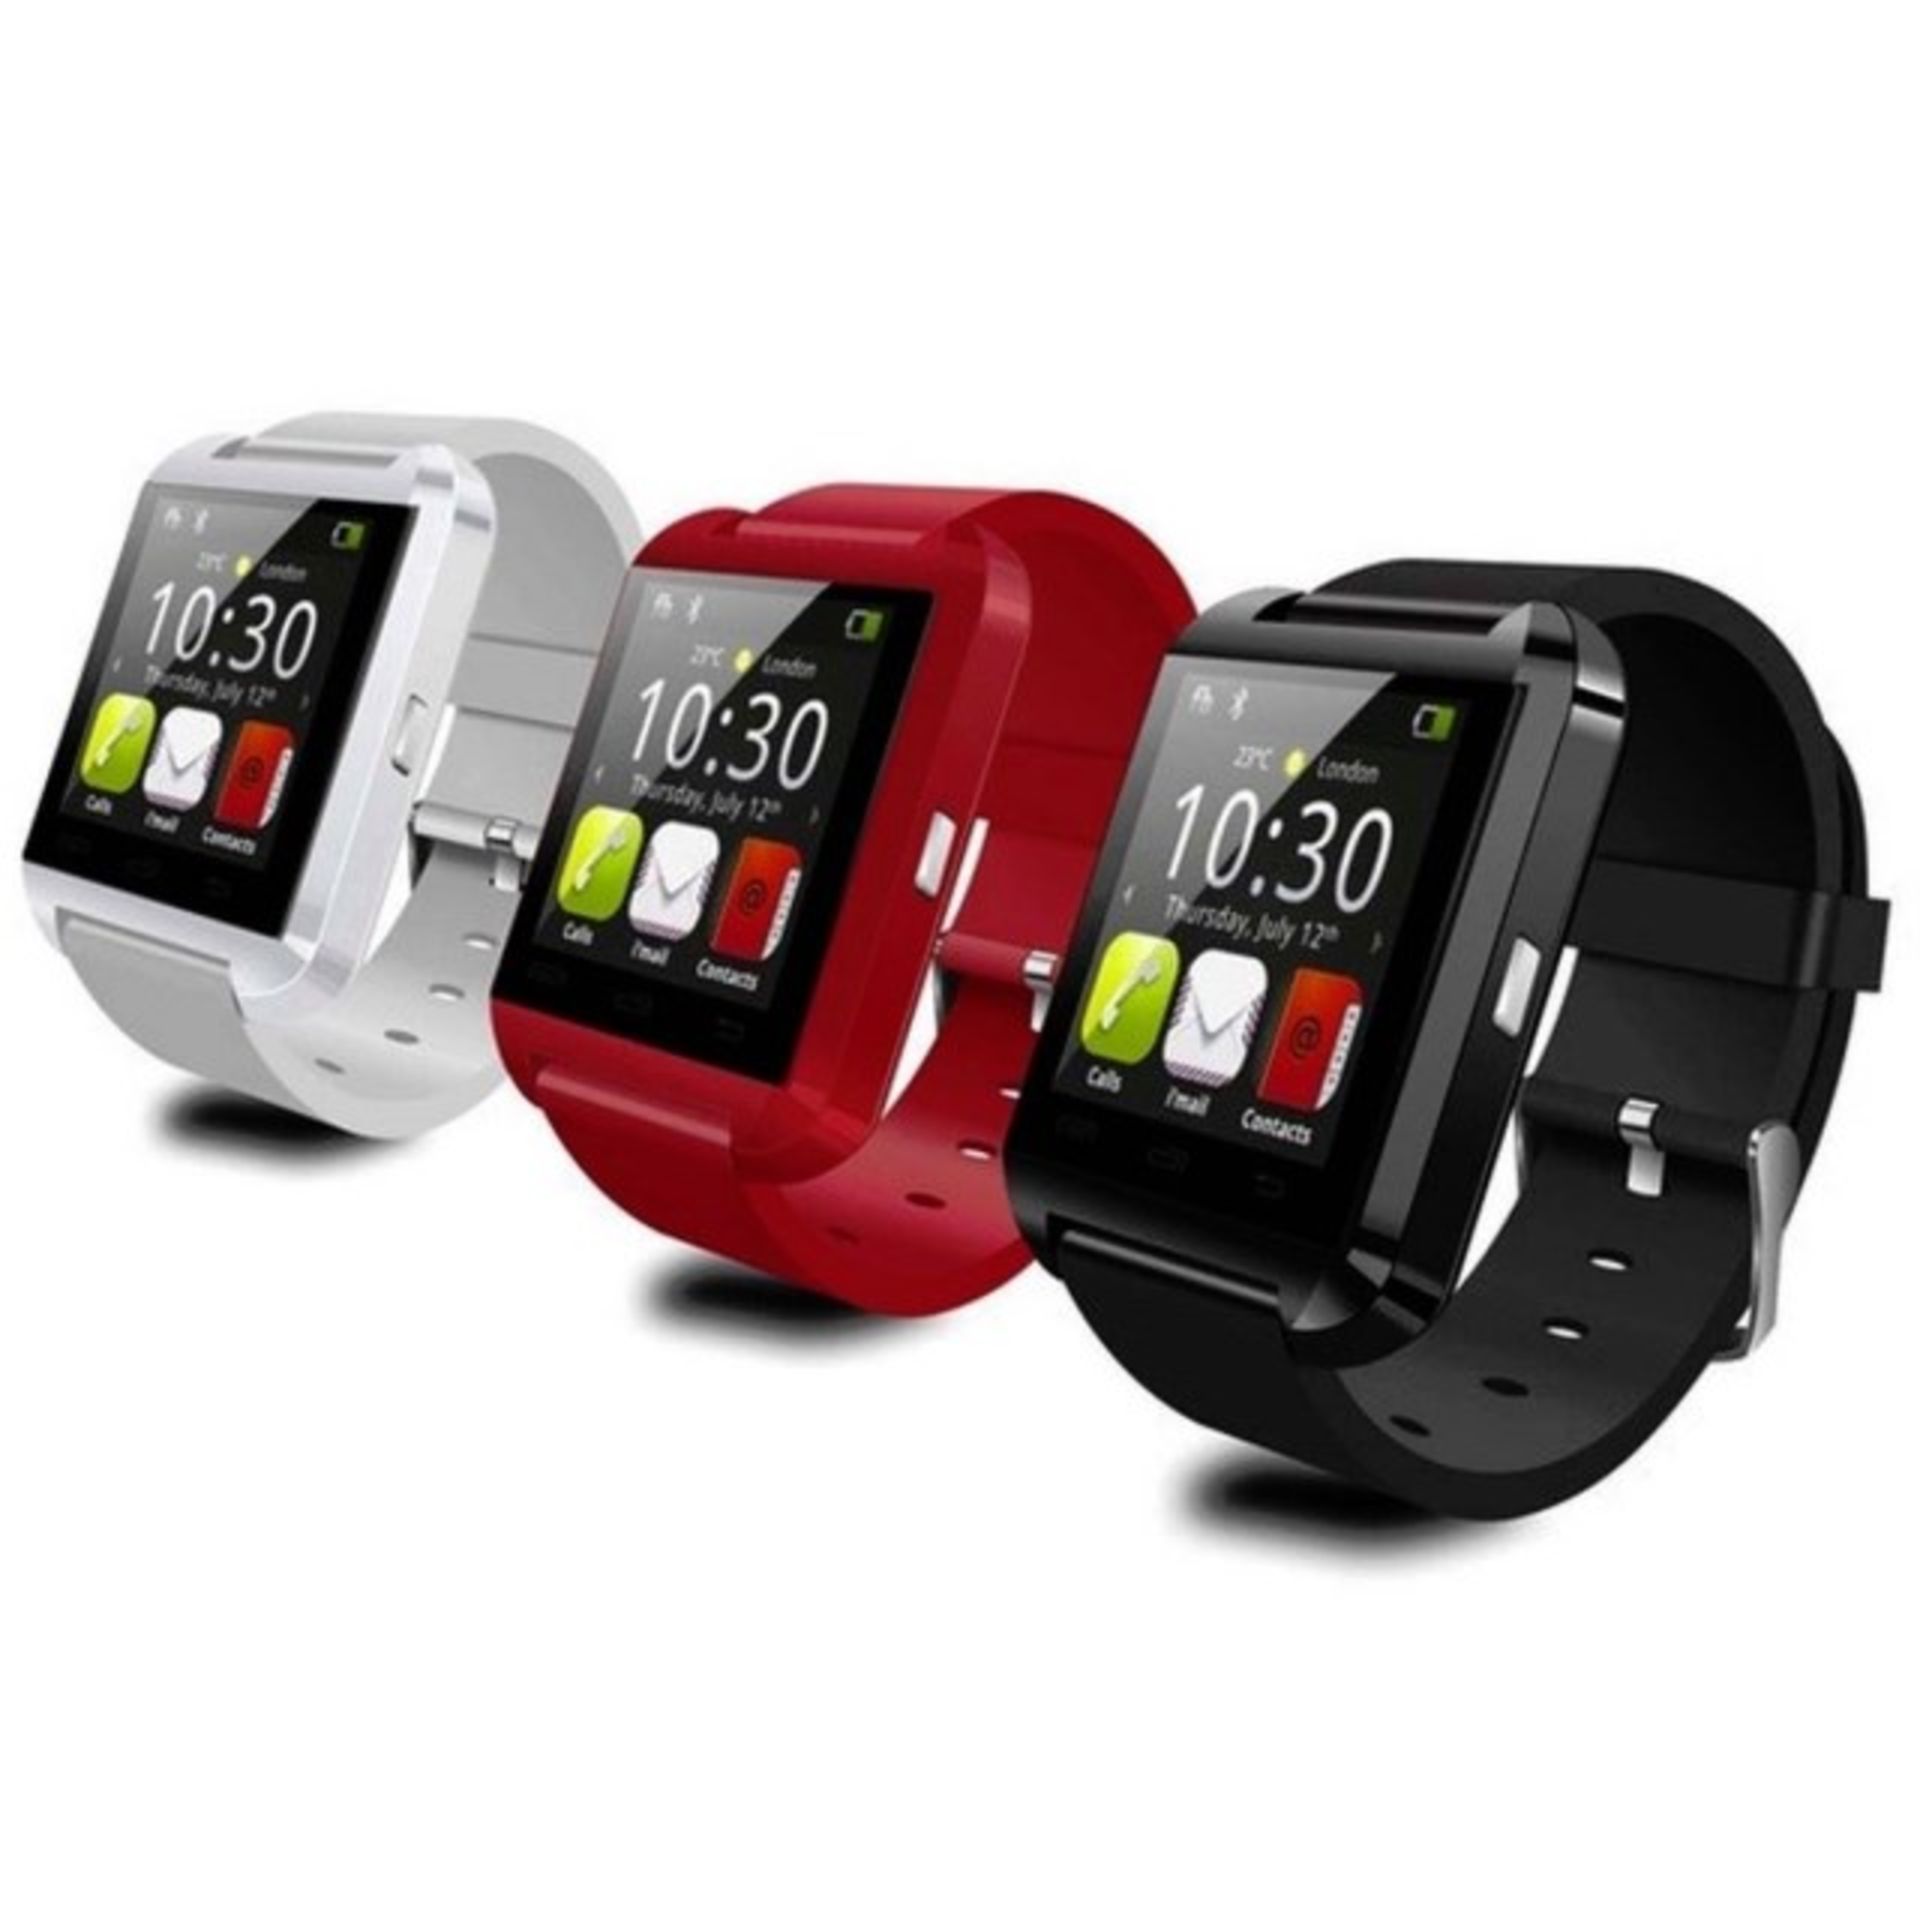 Brand New Boxed Bluetooth Smart Watch With Touchscreen - Can Talk/Recieve Phone Calls and Text - Image 2 of 4